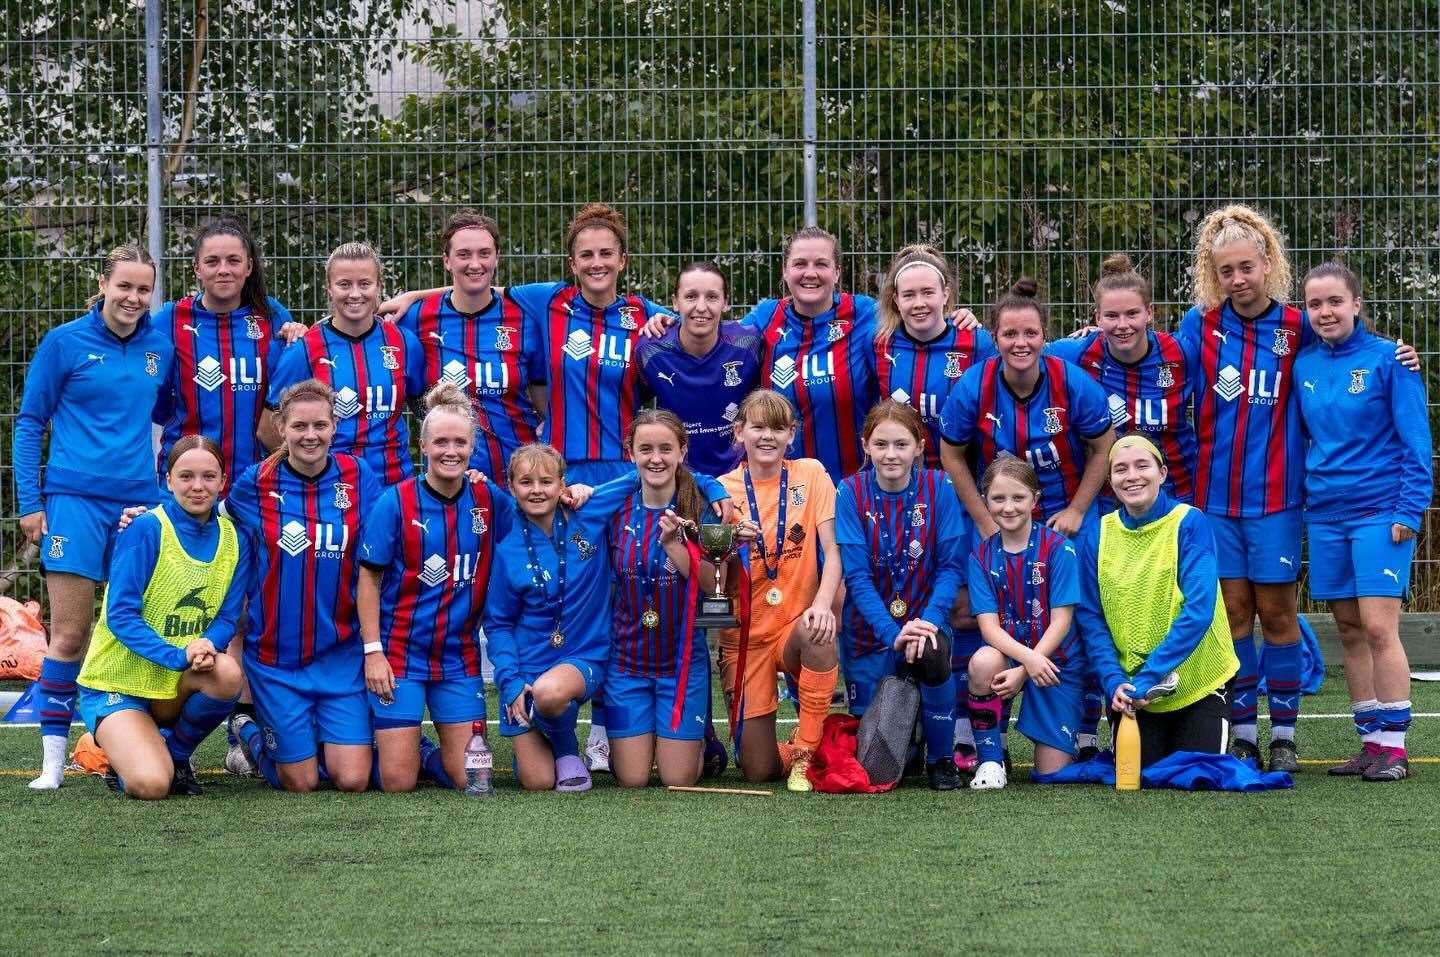 Inverness Caledonian Thistle Women's youth set up has gone from strength to strength but has no permanent home base.